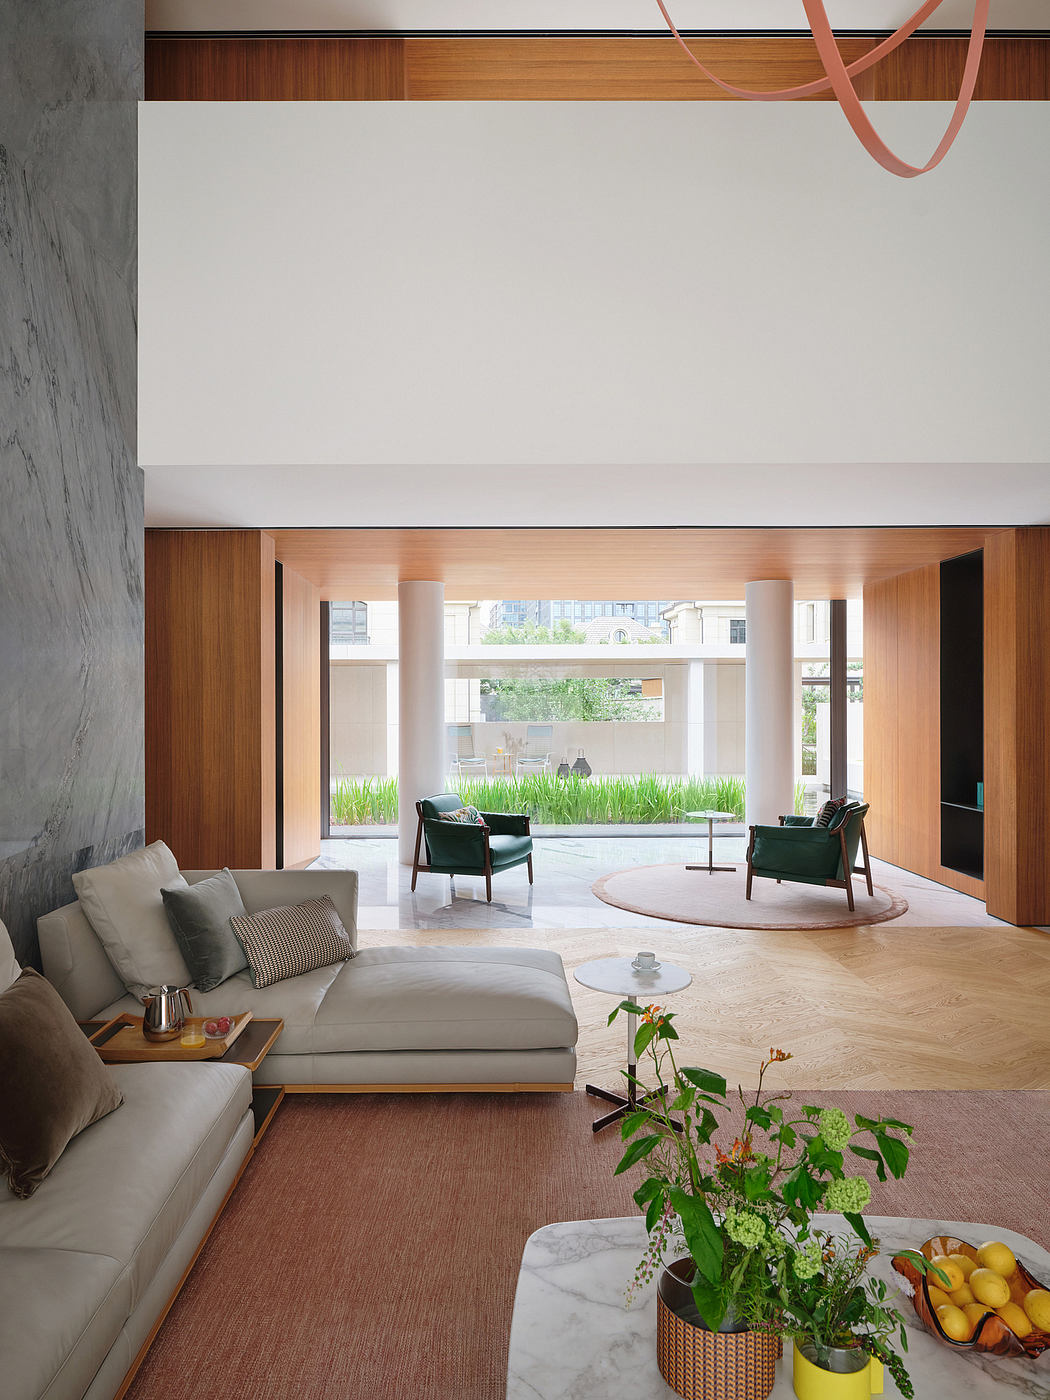 Spacious modern interior with clean lines, natural materials, and integrated greenery.